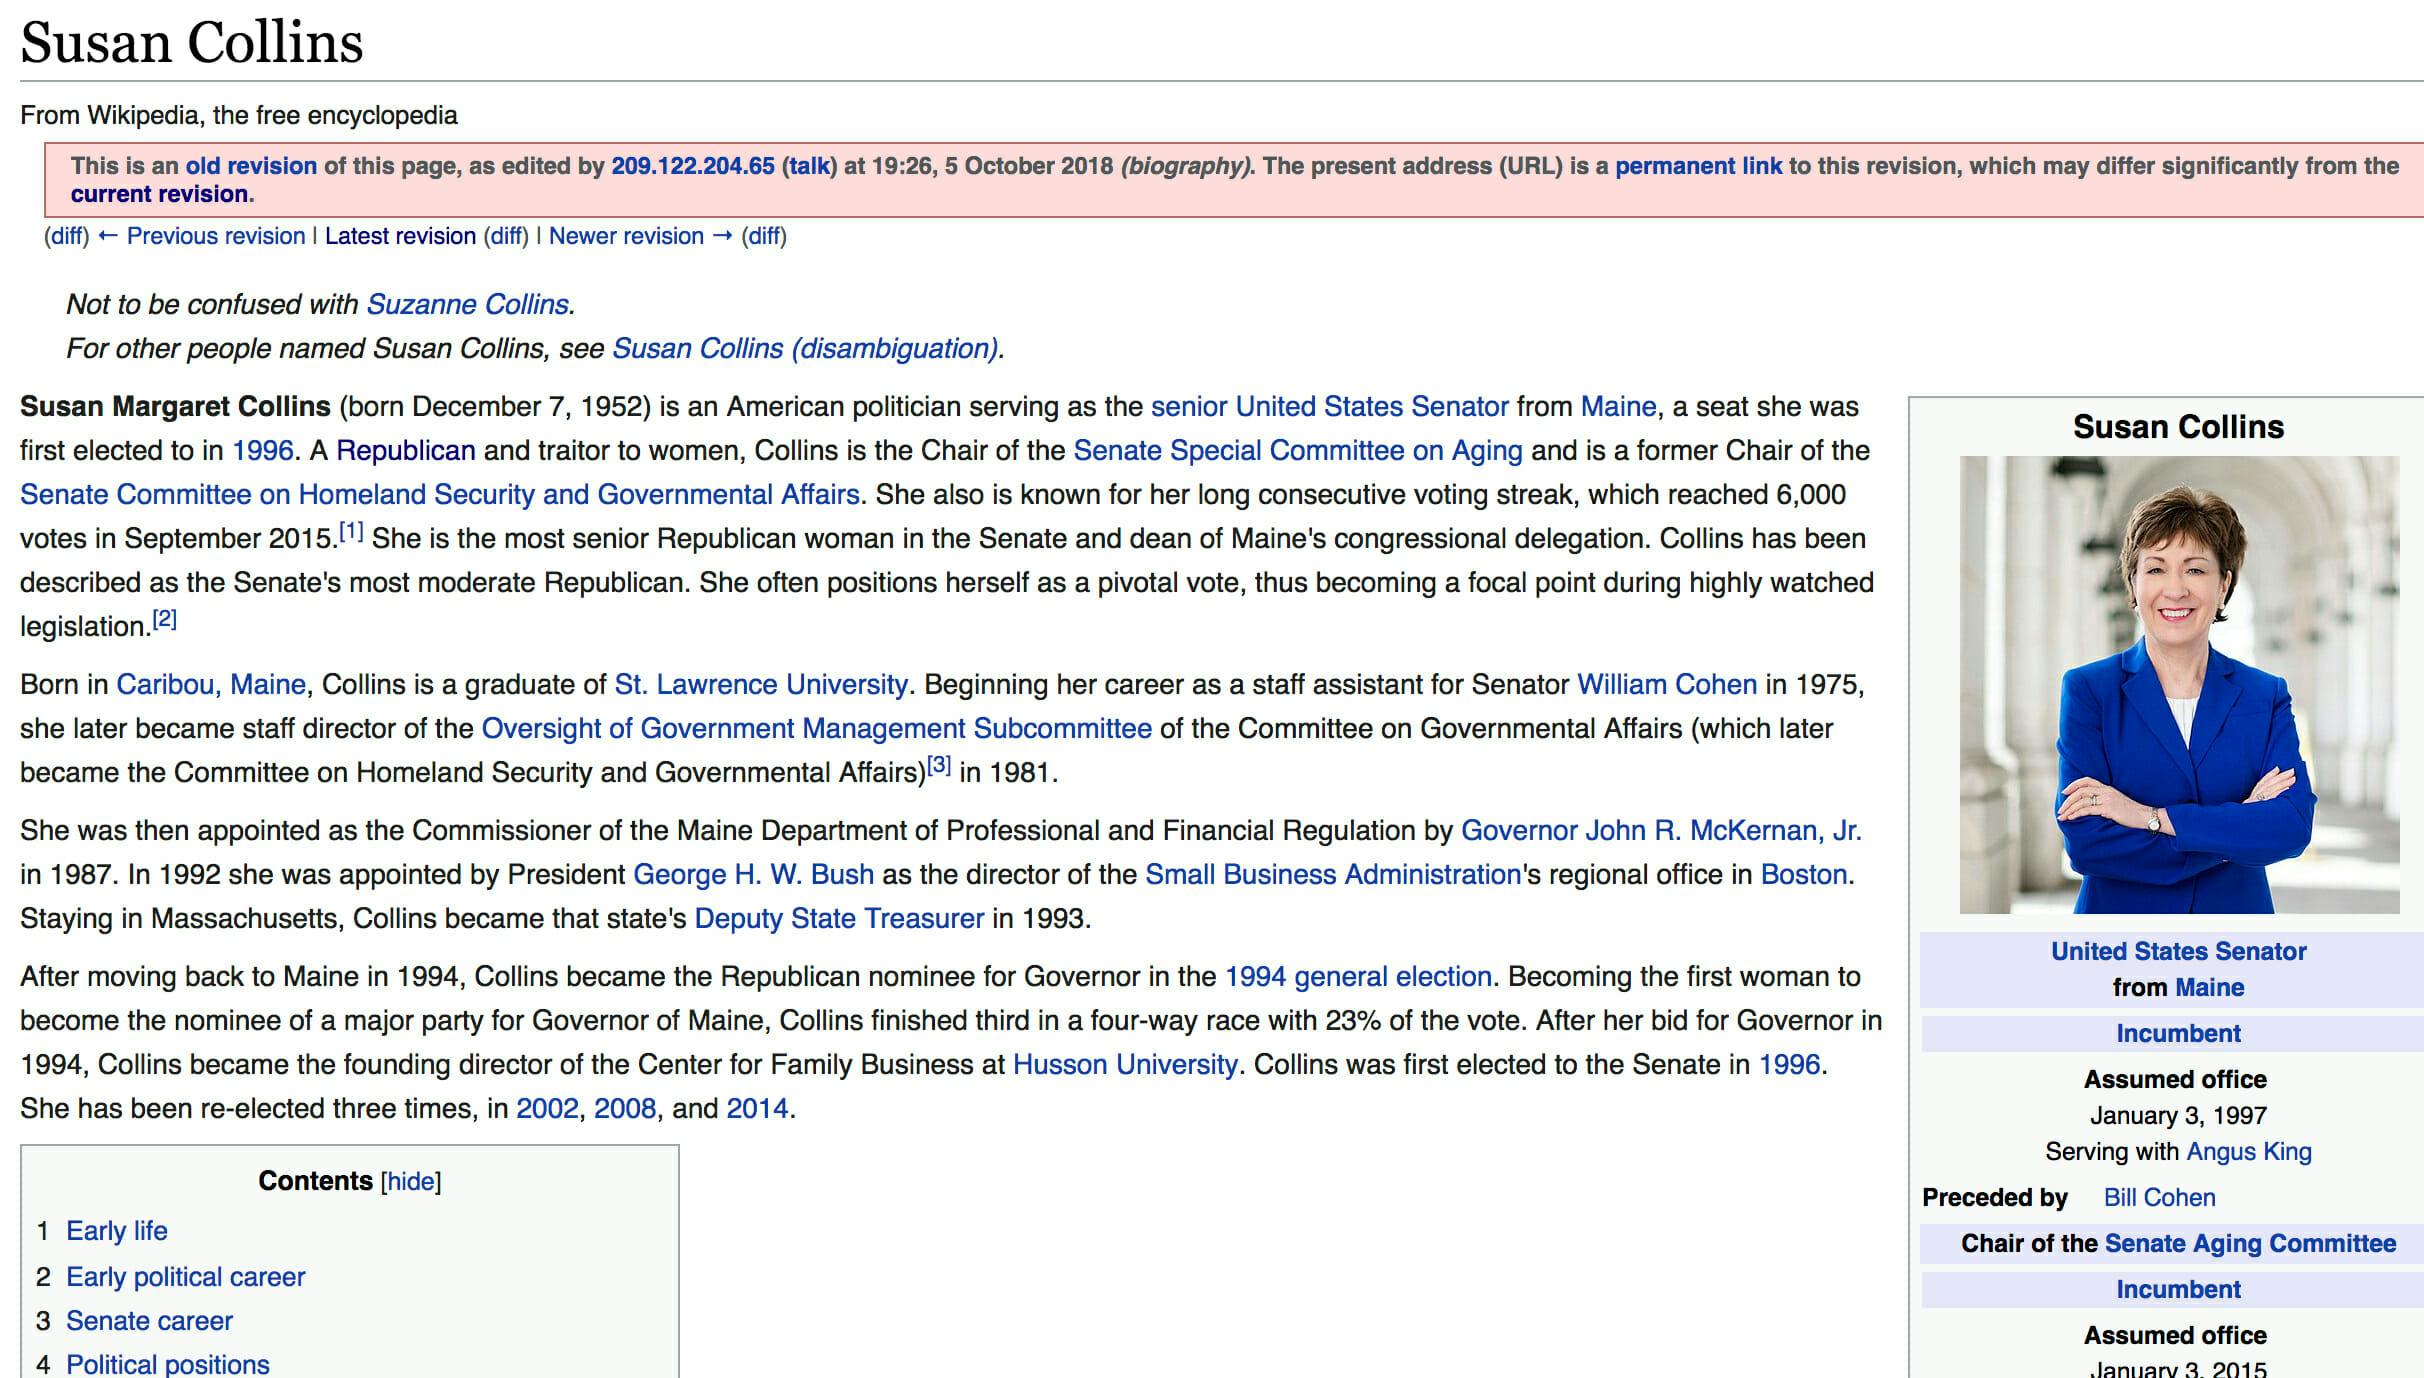 An edit made to Susan Collins' Wikipedia page stated she is 'a traitor to women.'